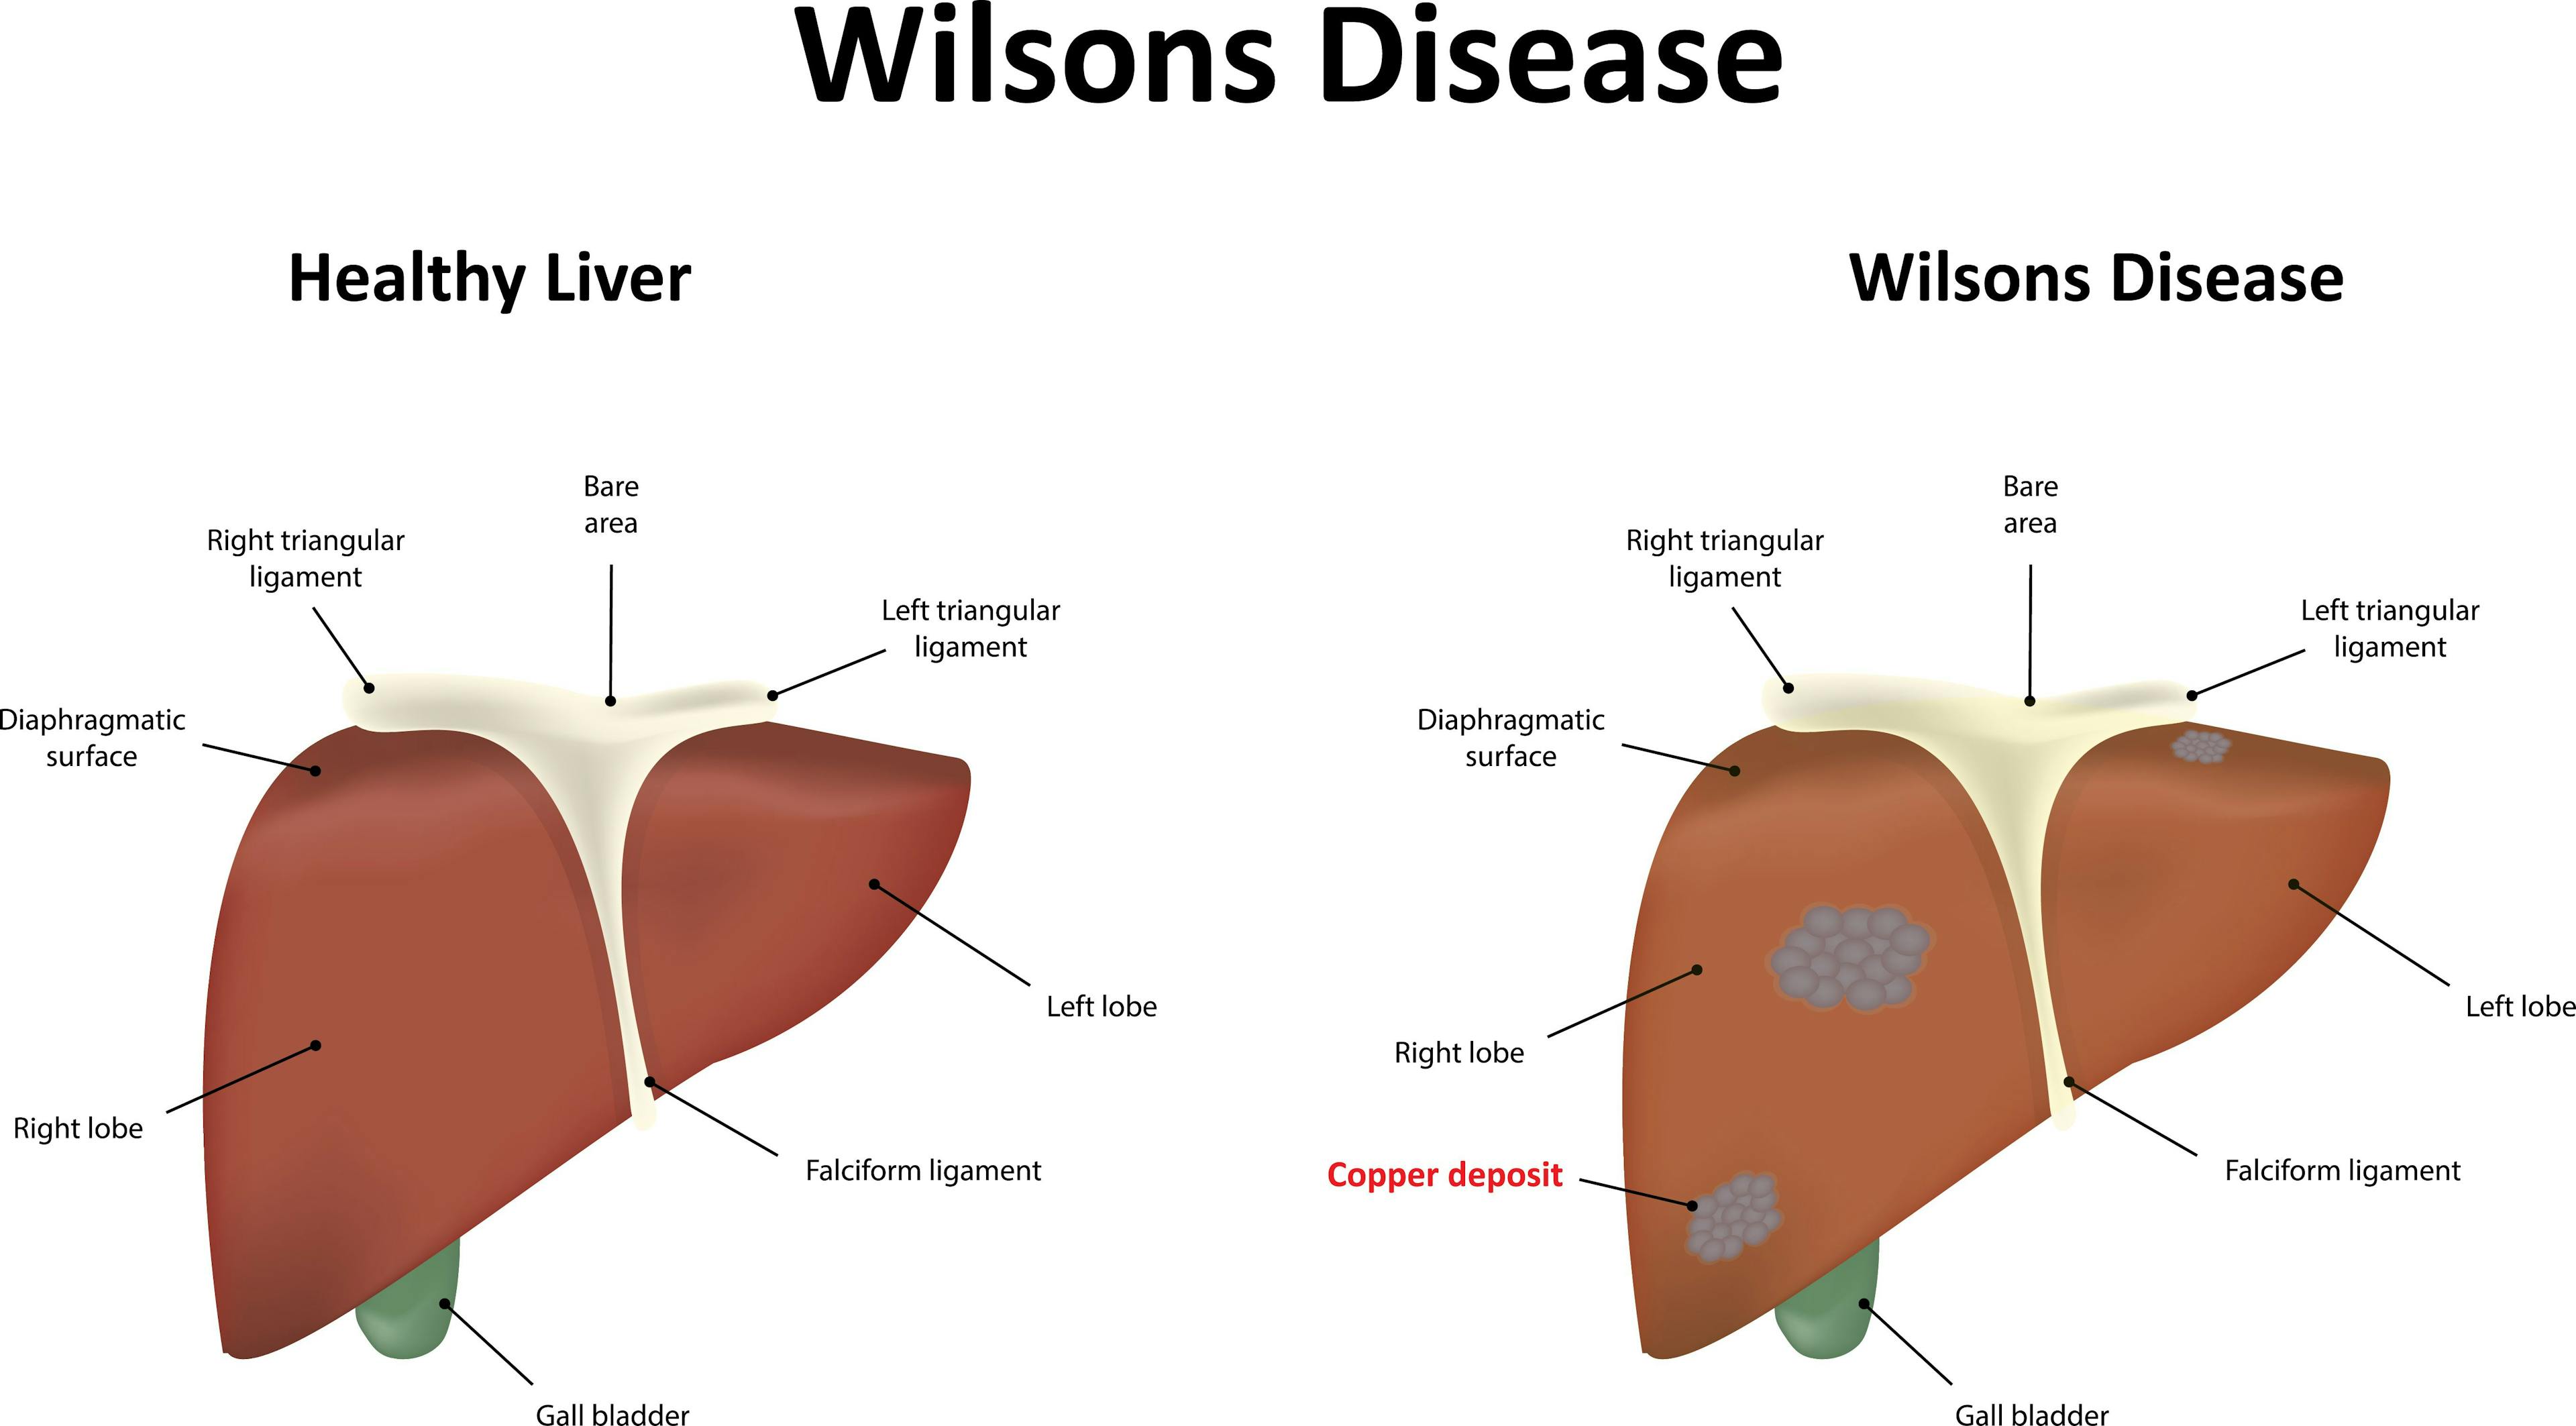 Gene Therapy Among the New Possible Treatments for Wilson’s Disease, a Rare Liver Disease